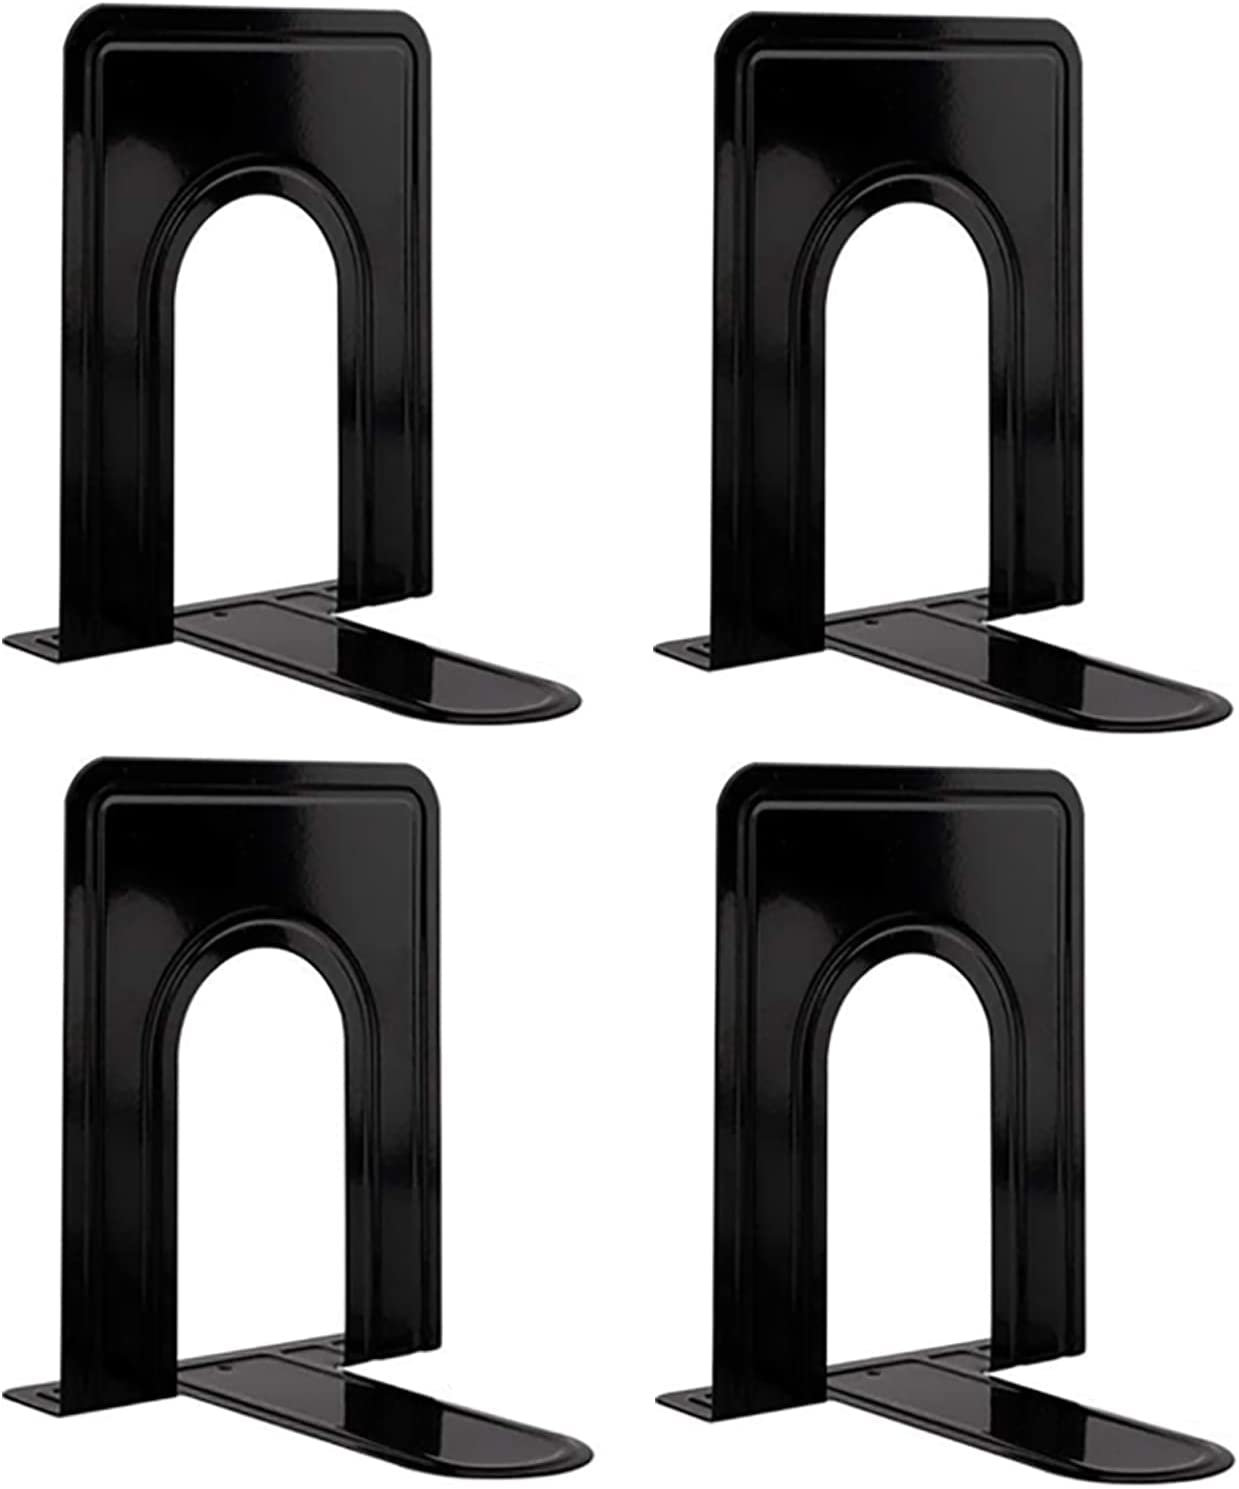 Black, 1 Pair Non-Skip Metal Bookends for School Book Ends for Shelves Decorative Bookends for Heavy Books Home or Office Book Ends